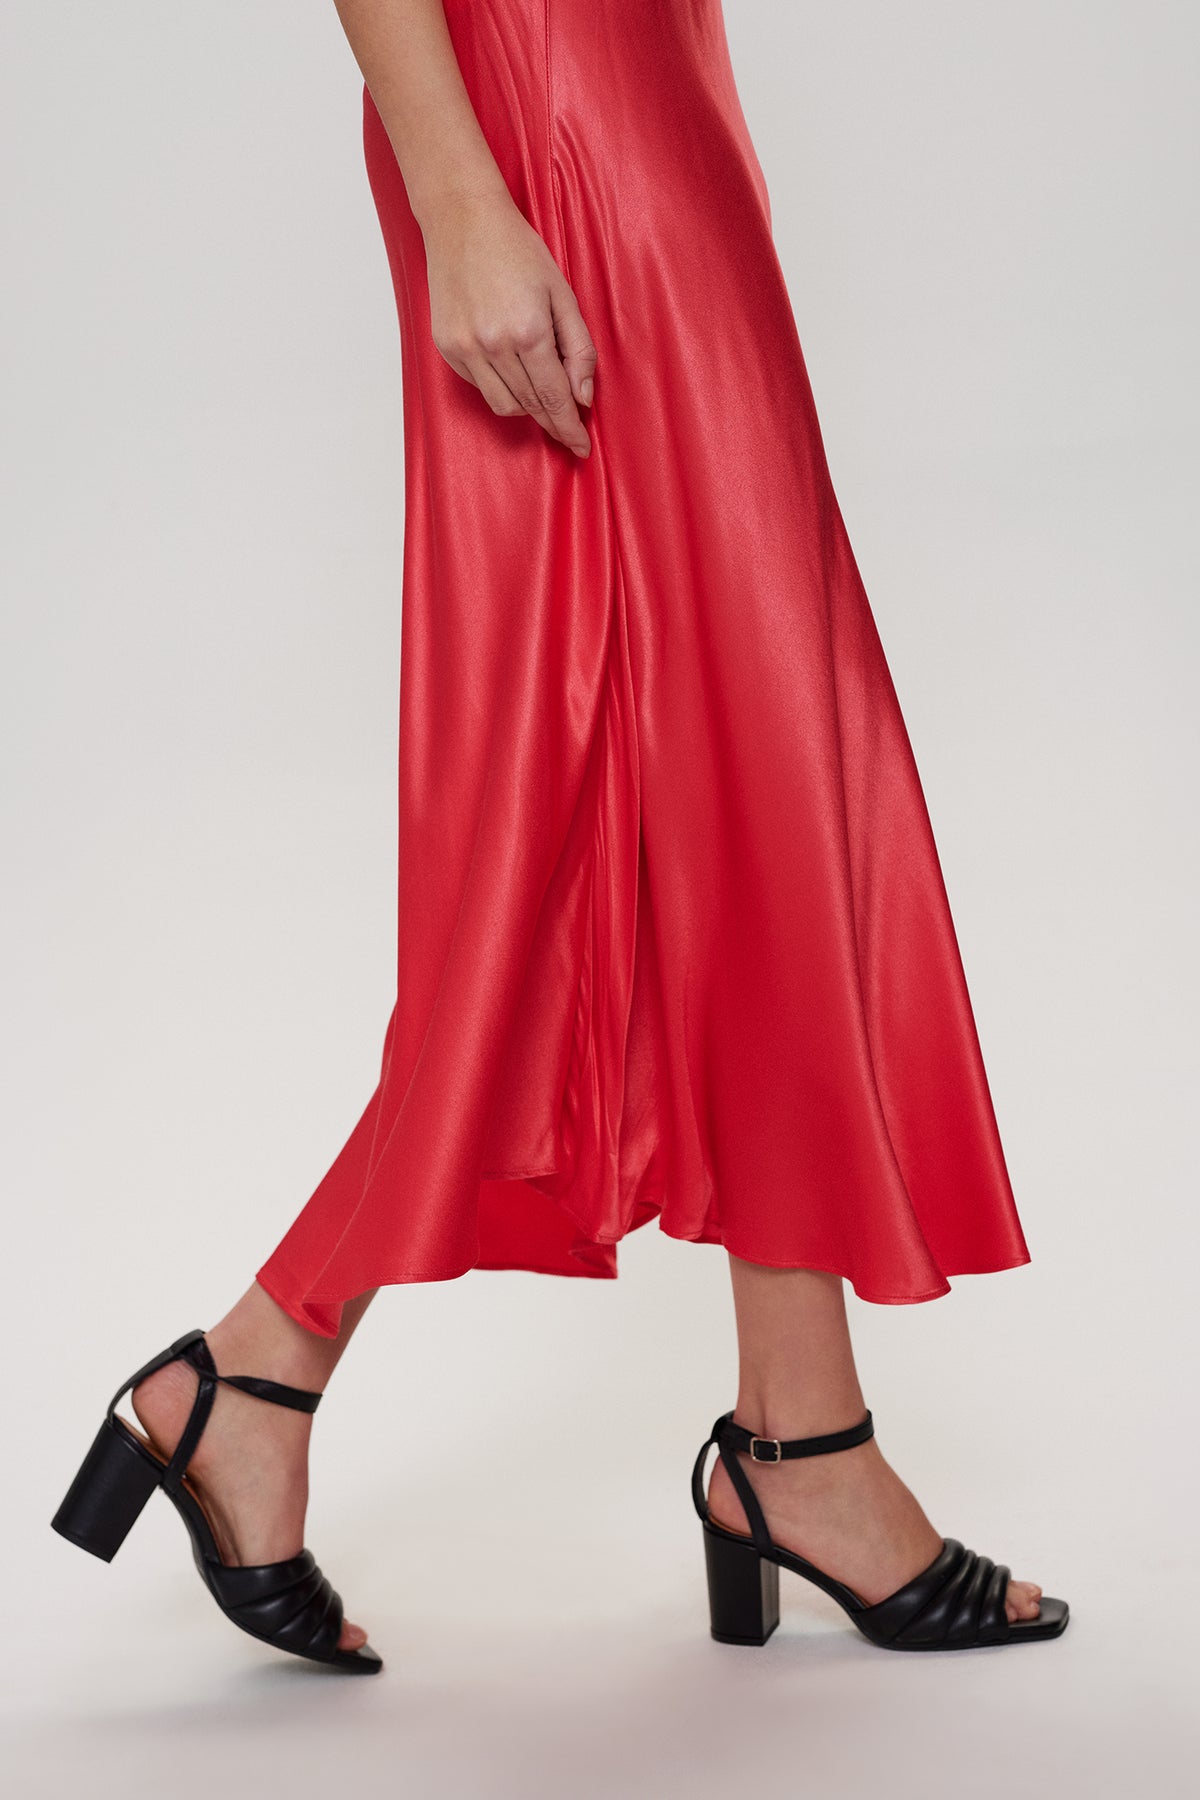 Nuevelyn Skirt - Teaberry